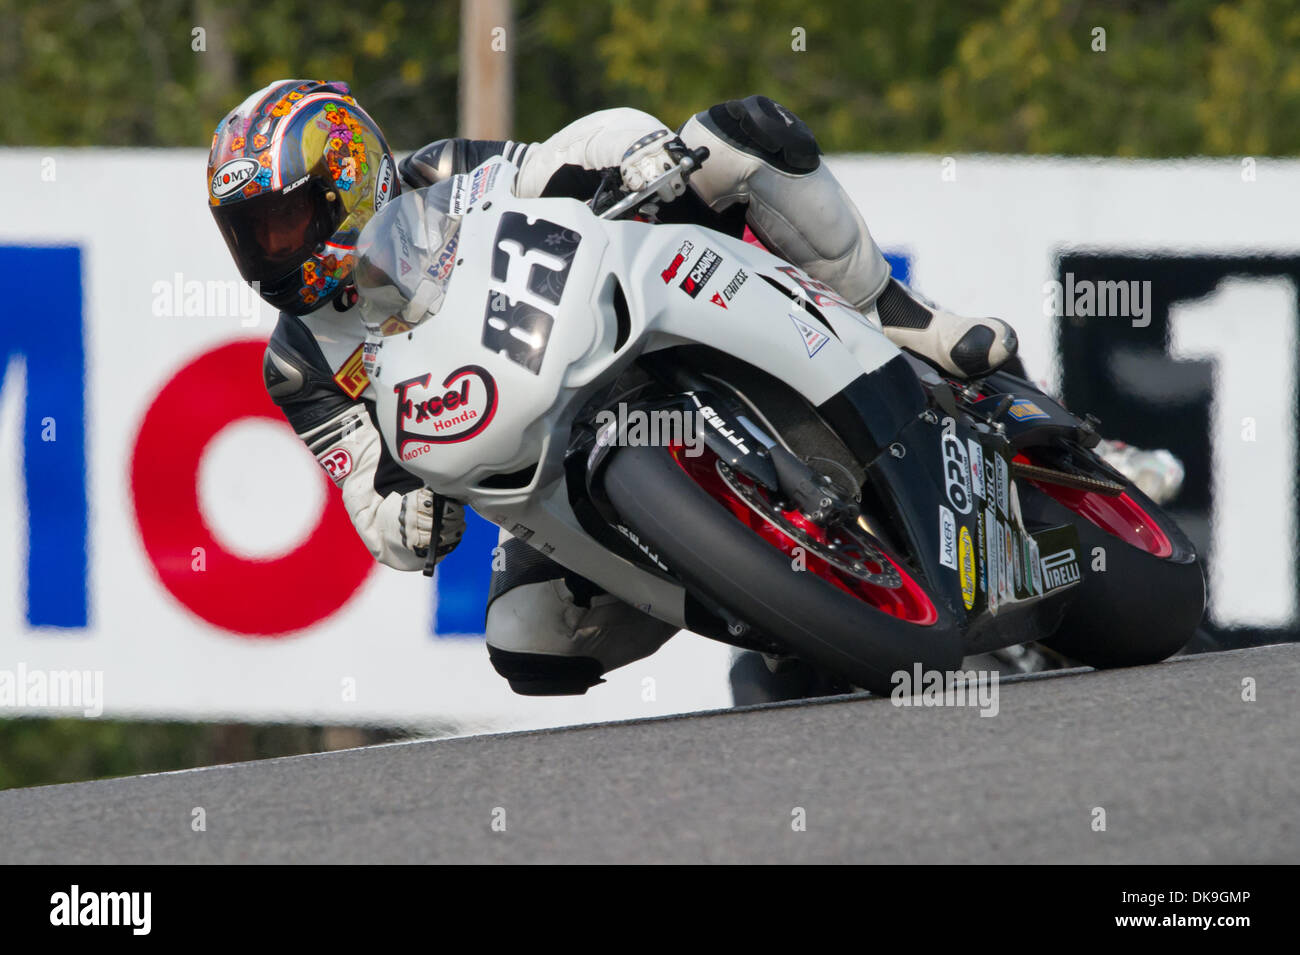 Aug. 20, 2011 - Bowmanville, Ontario, Canada - Marie-Josee Boucher of  Montreal, QC riding the #83 Honda CBR1000RR would finish in 10th place in  the Parts Canada Pro Superbike Race at Mosport